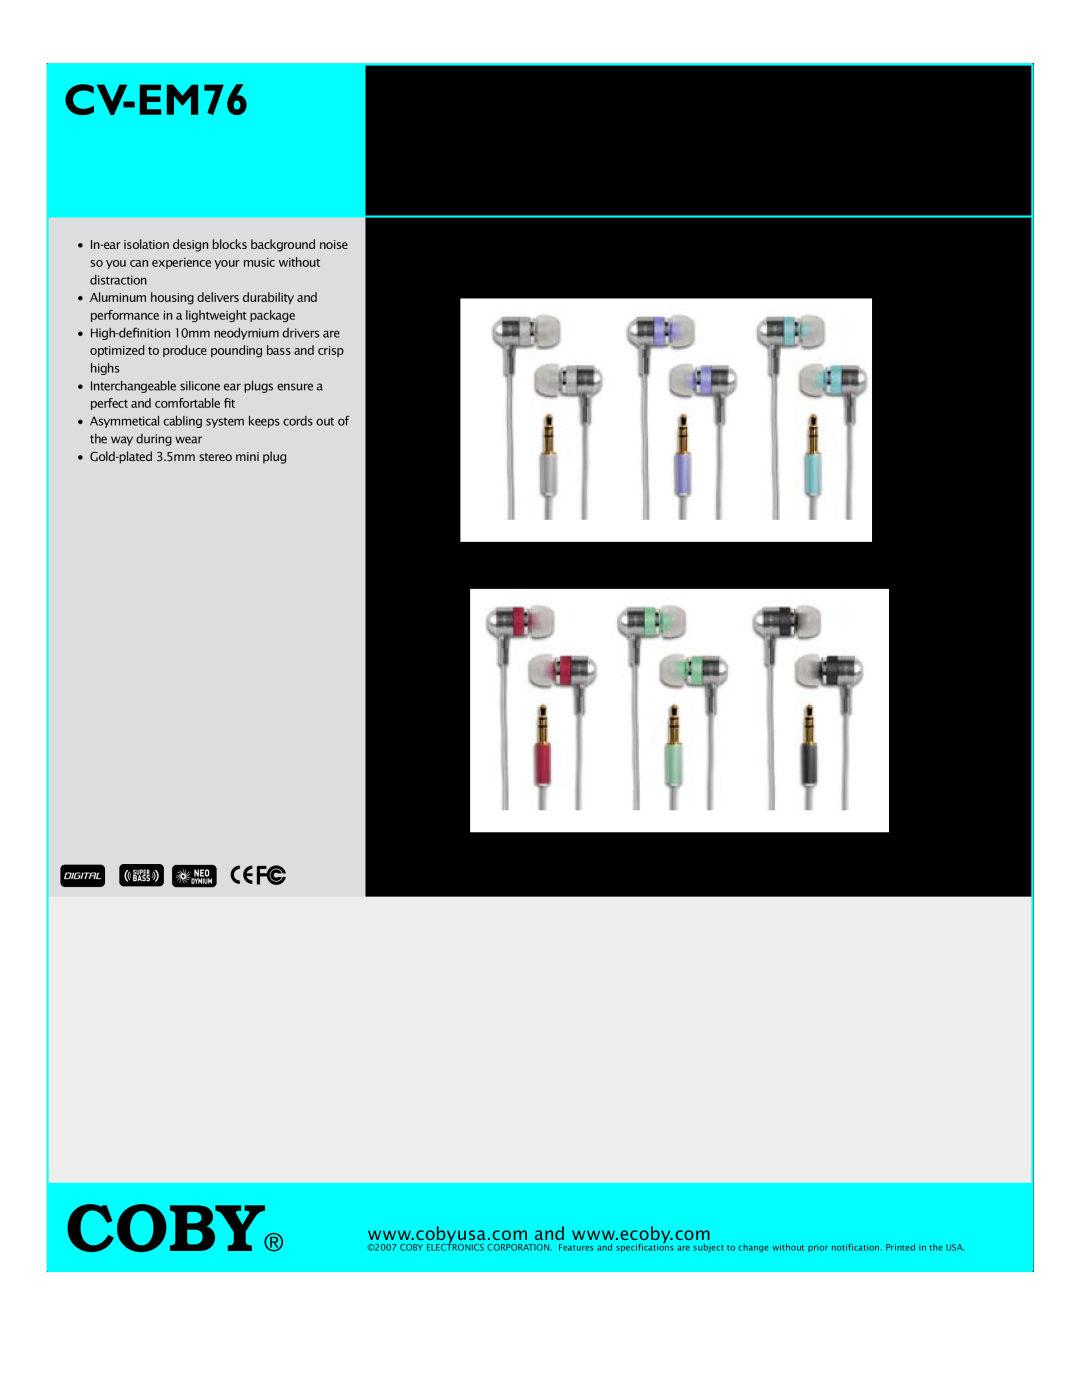 COBY electronic CV-EM76 specifications Coby, Professional Aluminum Isolation Earphones 